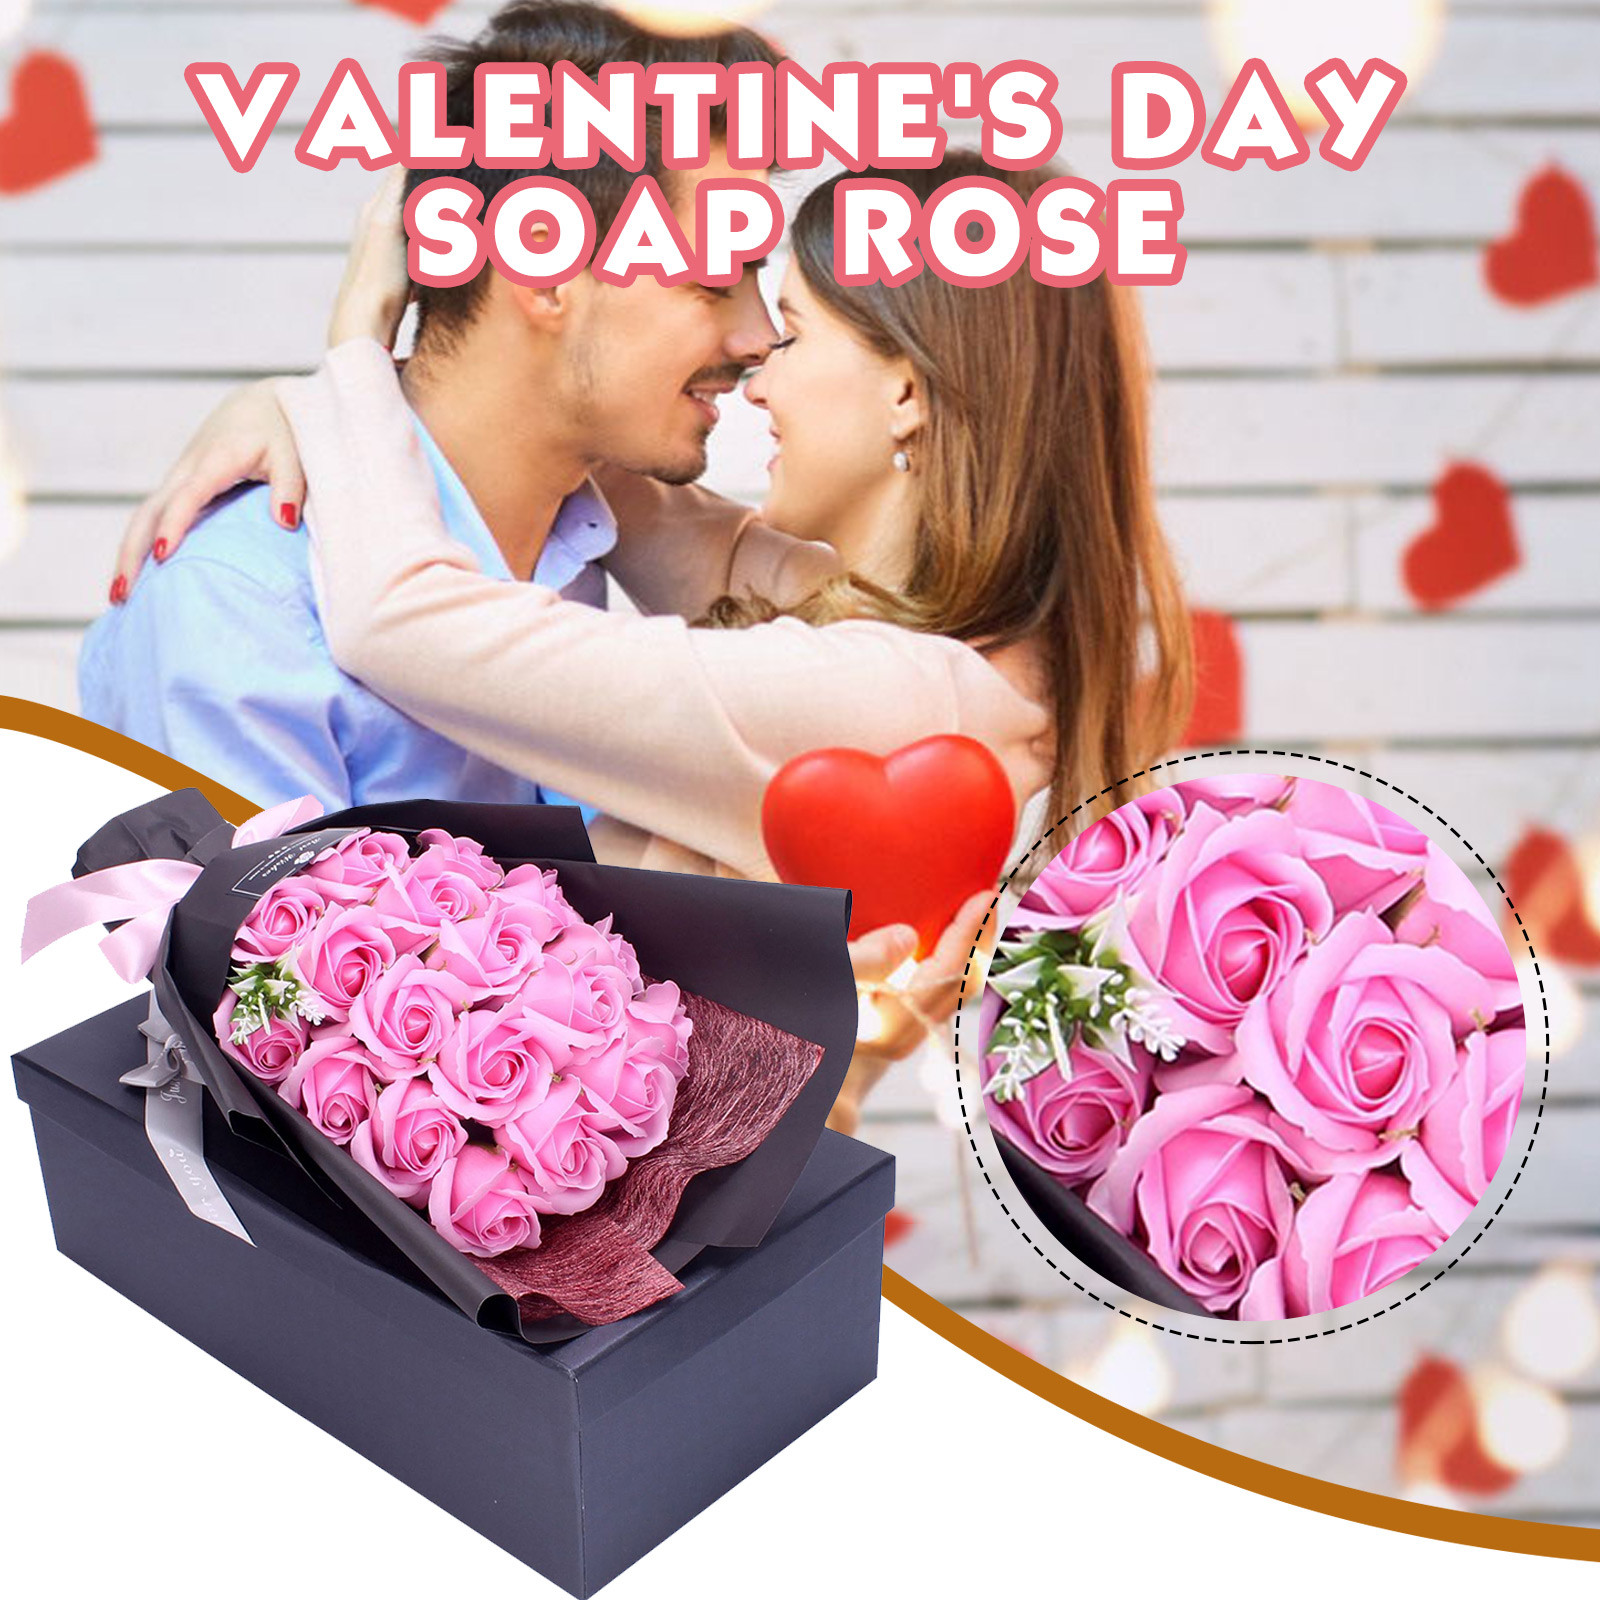 TUTUnaumb 2023 New Year's Gift Valentine'S Day Creative Gift 18 Soap Rose Bundle Gift Box Cross Border Mother'S Day Birthday Gift Soap Bouquet For Your Lover Spot Promotion On Sale Multicolor